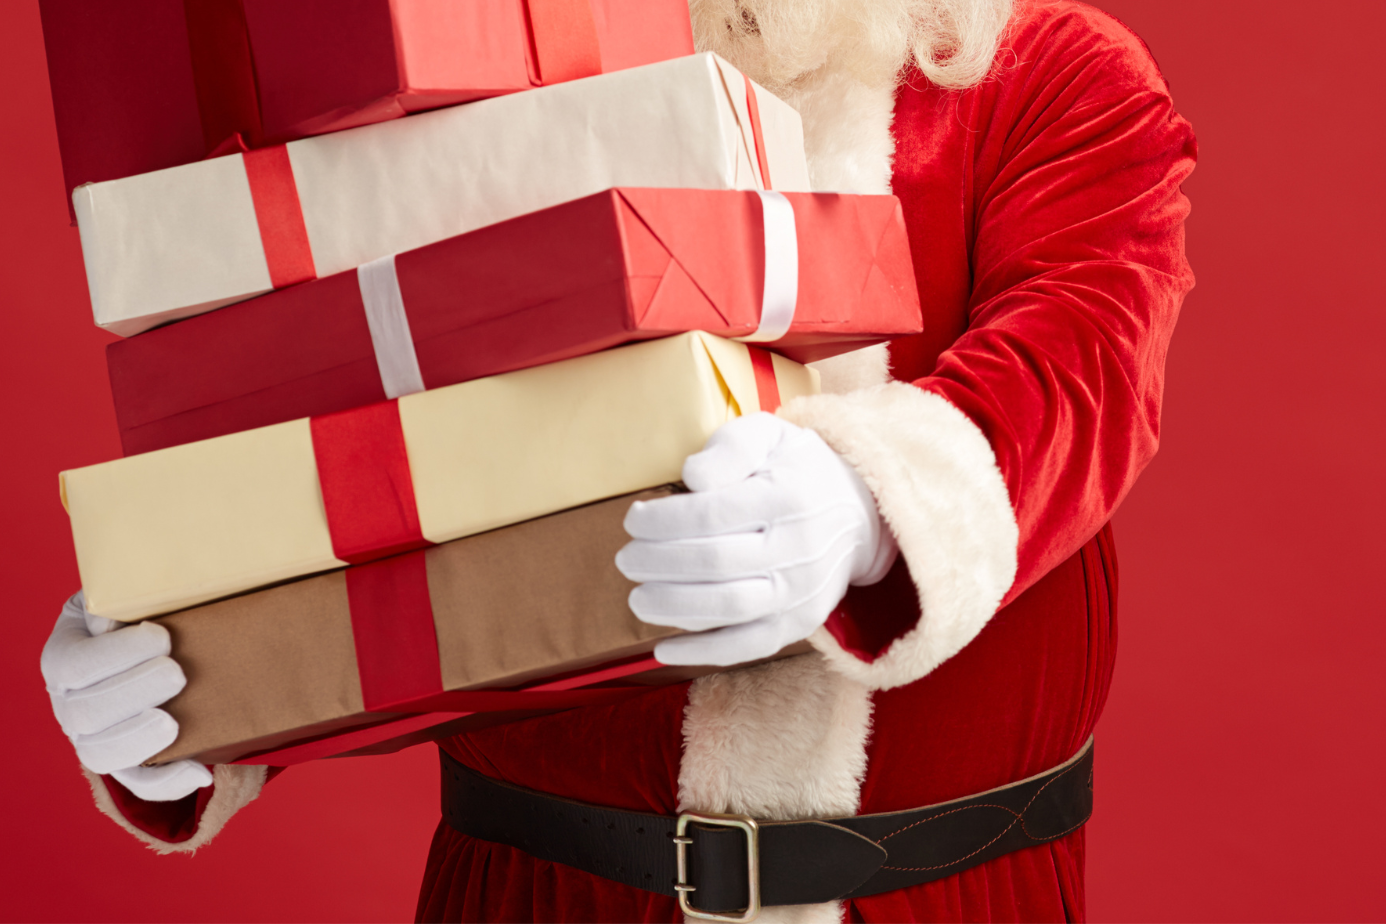 Real-life santa: A Santa figure holds presents in front of him.